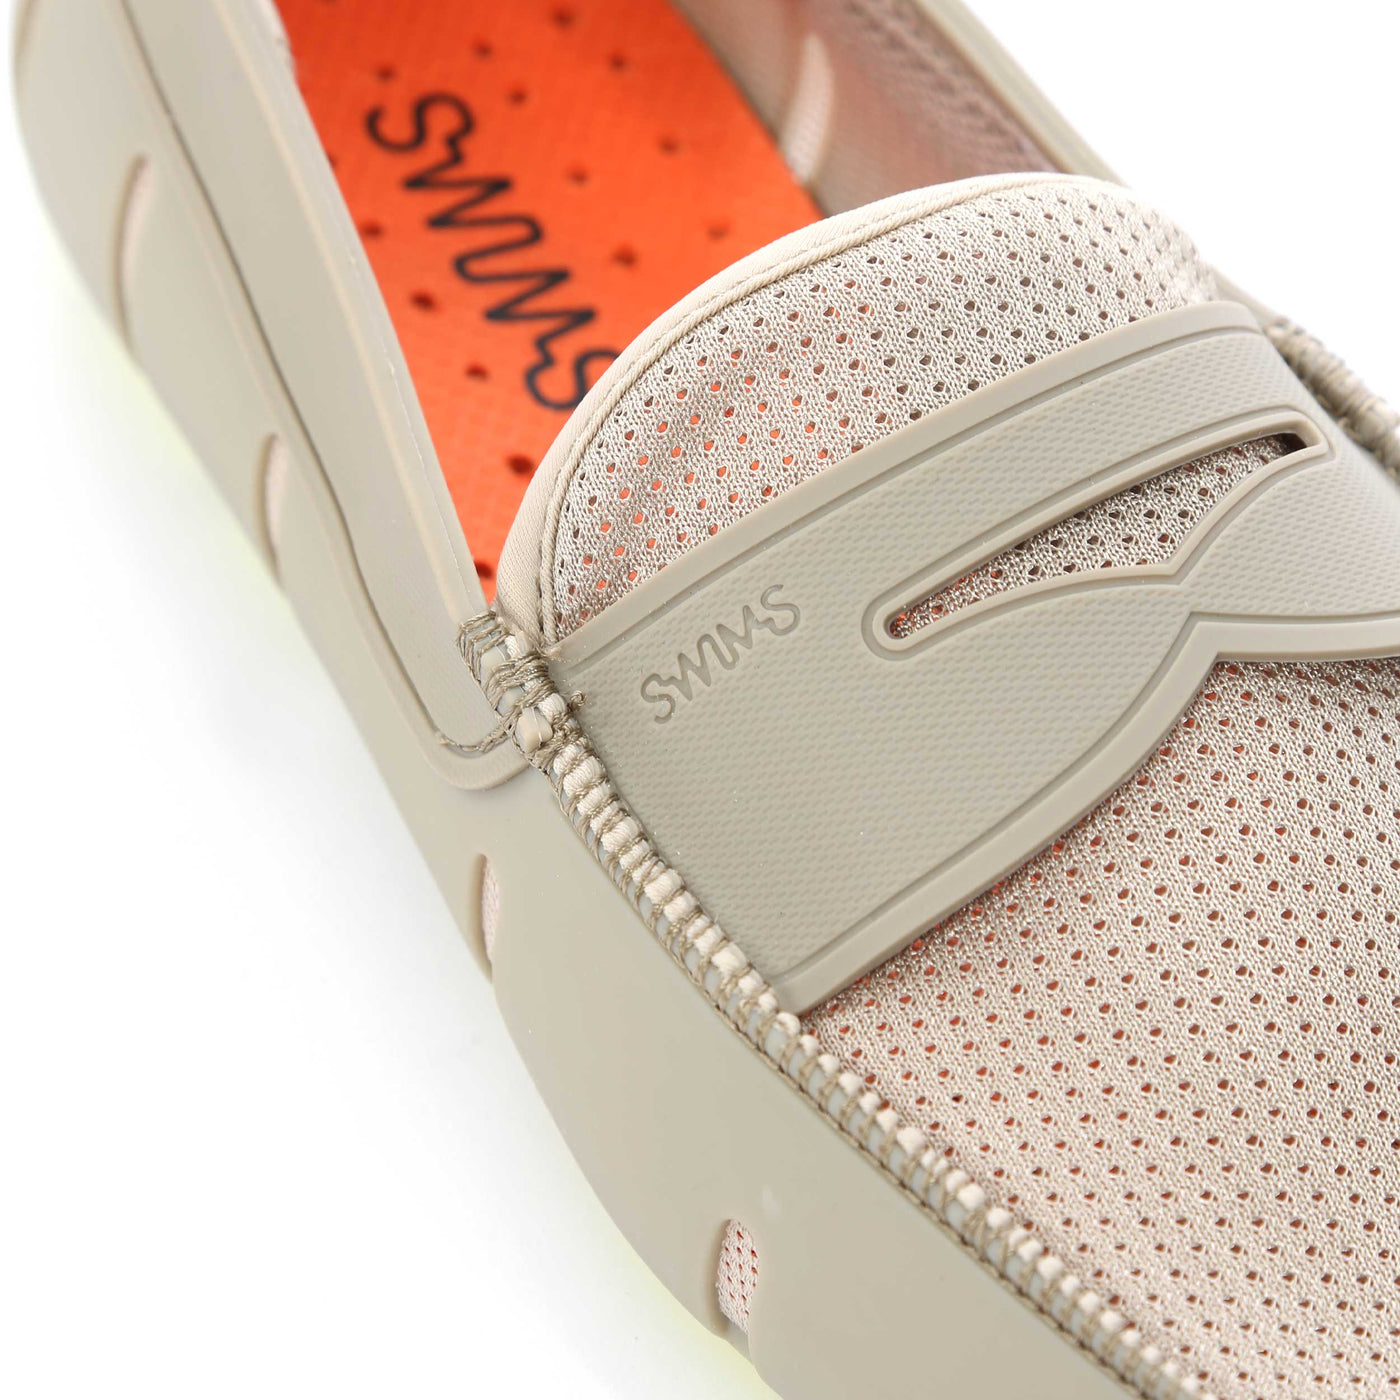 Swims Penny Loafer Shoe in Sand Dune Detail